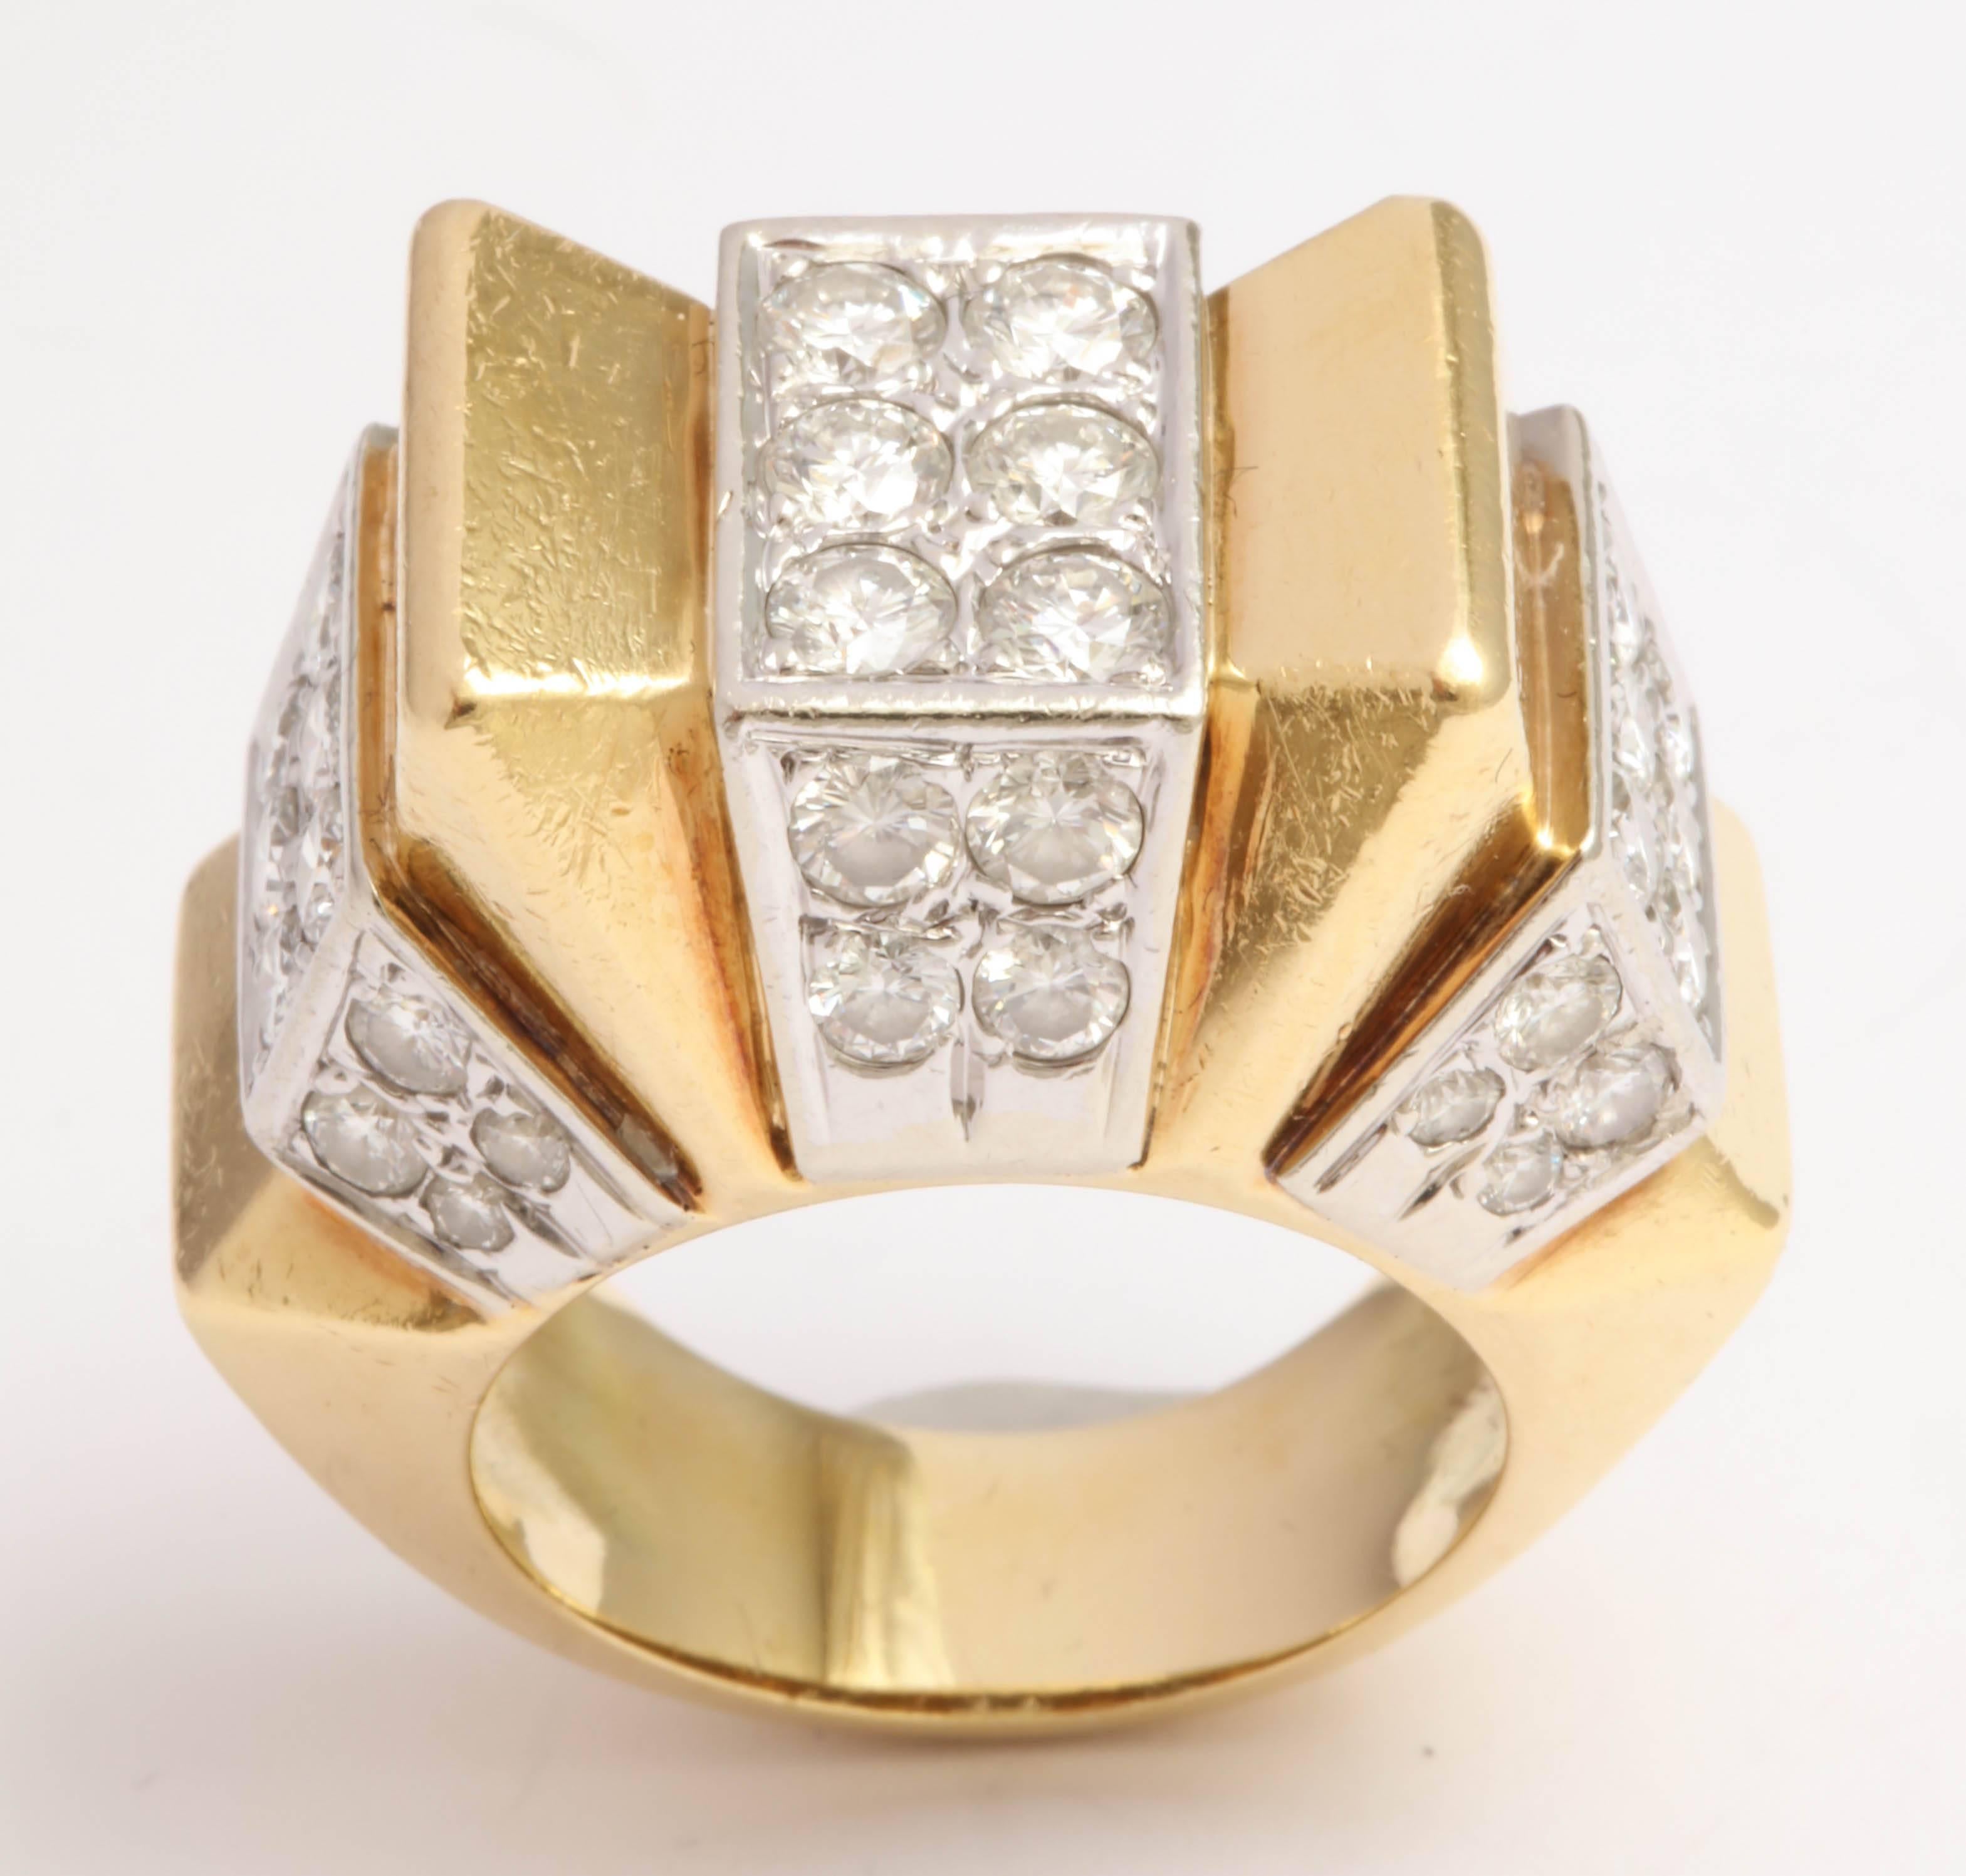 18k Yellow Gold - Deco Style Architectural Ring with 18kt White Gold & Pave set Diamonds boldly inset within the ing.
What a look.  Beautifully made and very eye catching.  Total Diamond weight - Approx - 1.55cts.  Size 7.25 but can be sized up